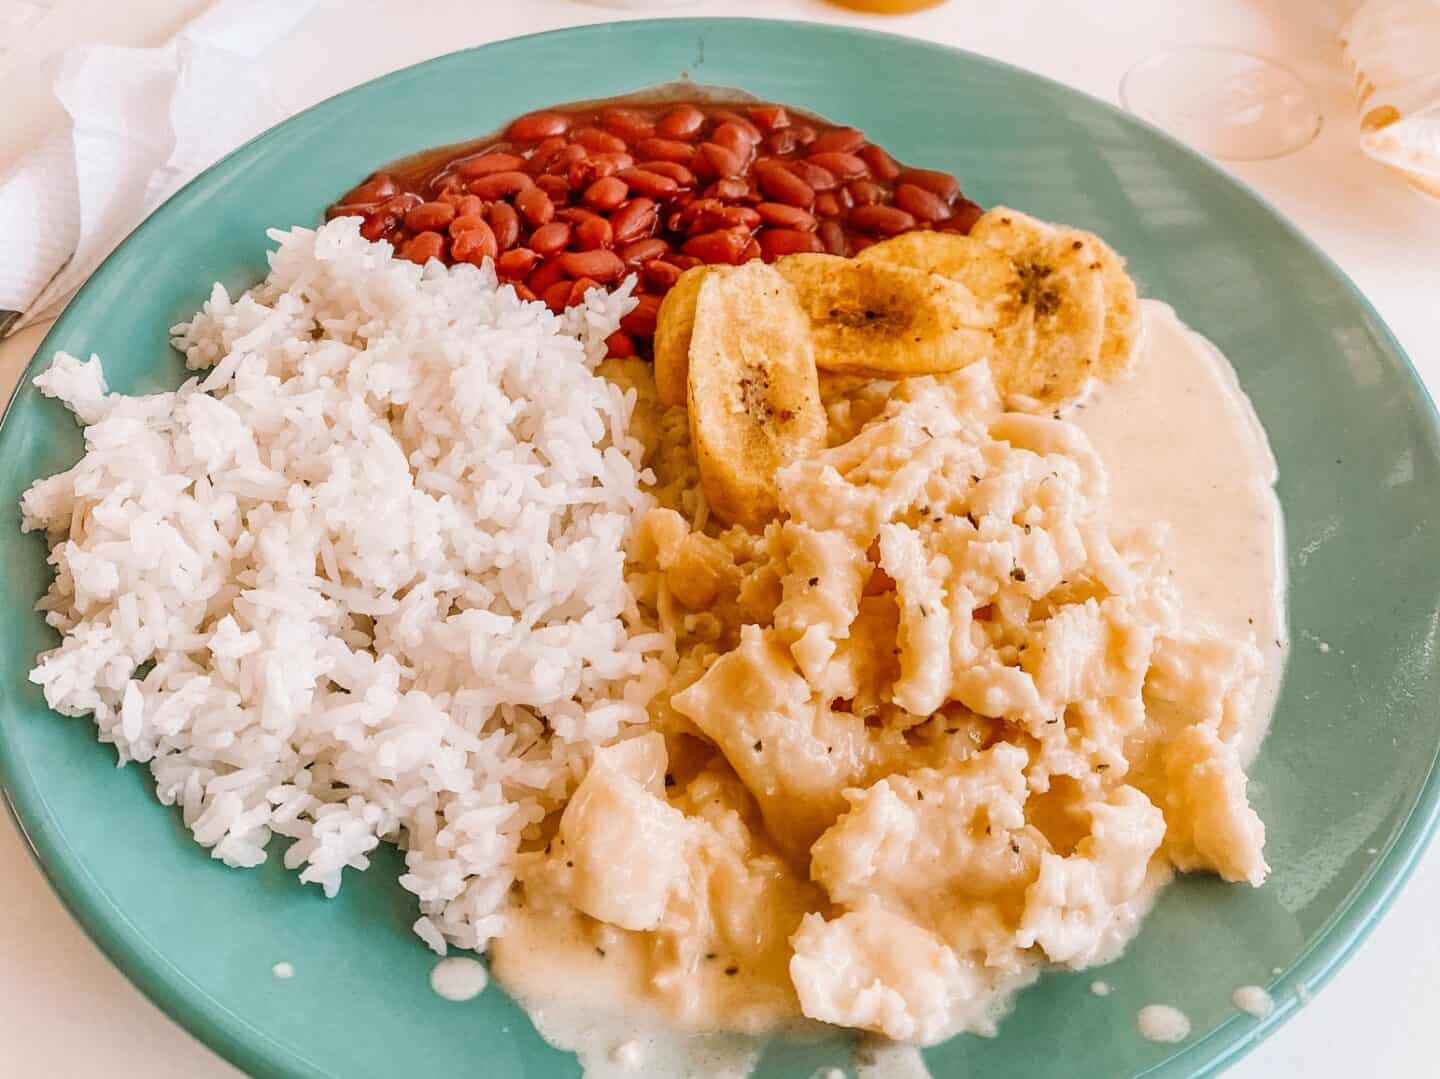 A heaping plate of conch in cream sauce, rice, beans and fried plantains from Loretta's Island Cooking Roatan